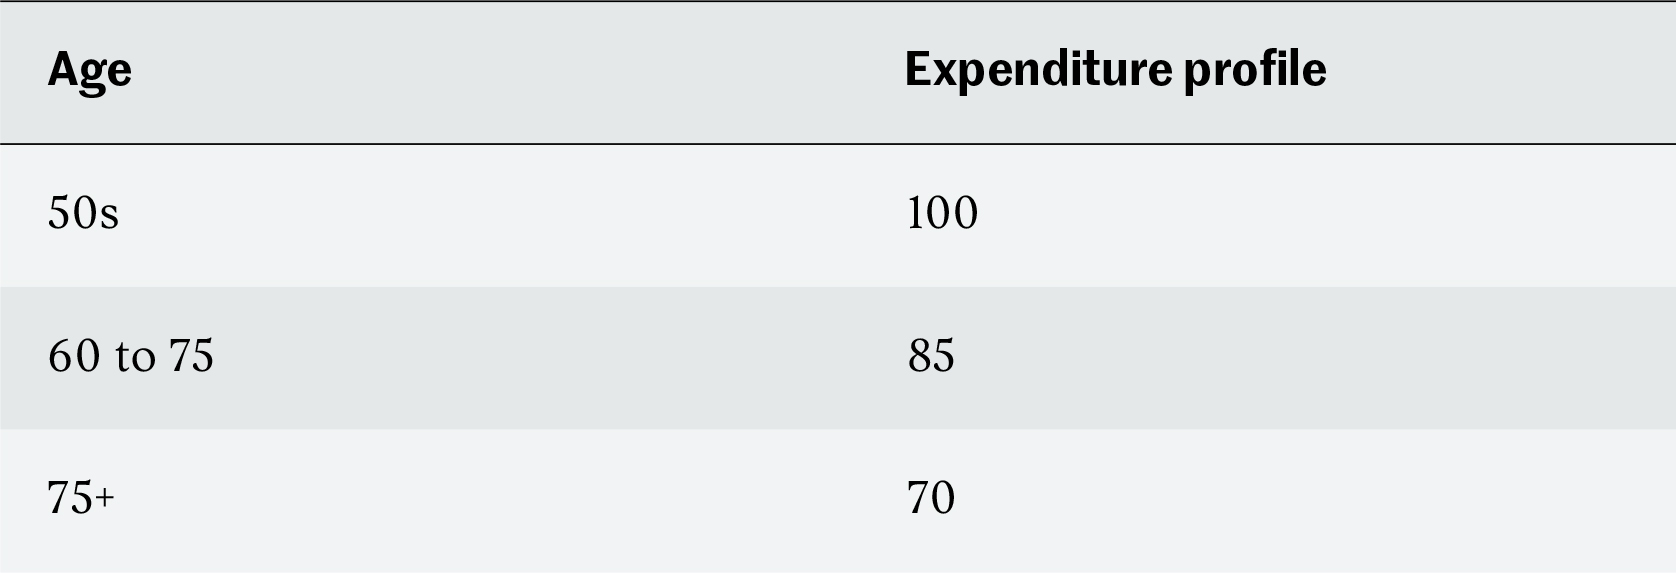 Expenditure profile table